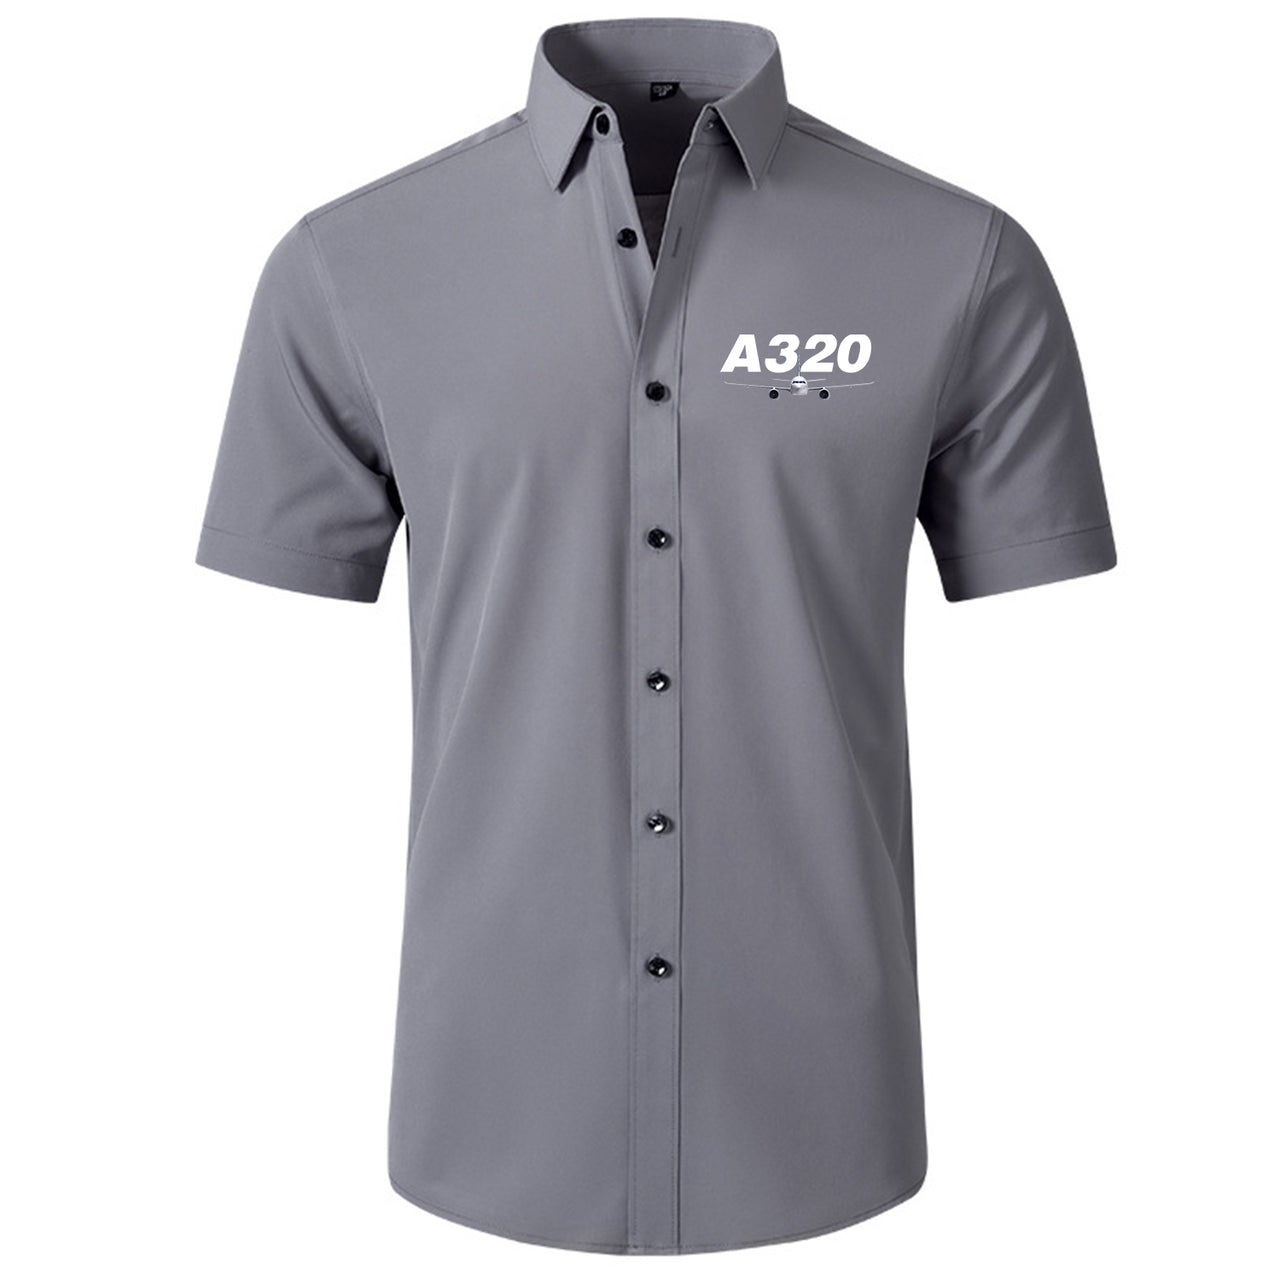 Super Airbus A320 Designed Short Sleeve Shirts